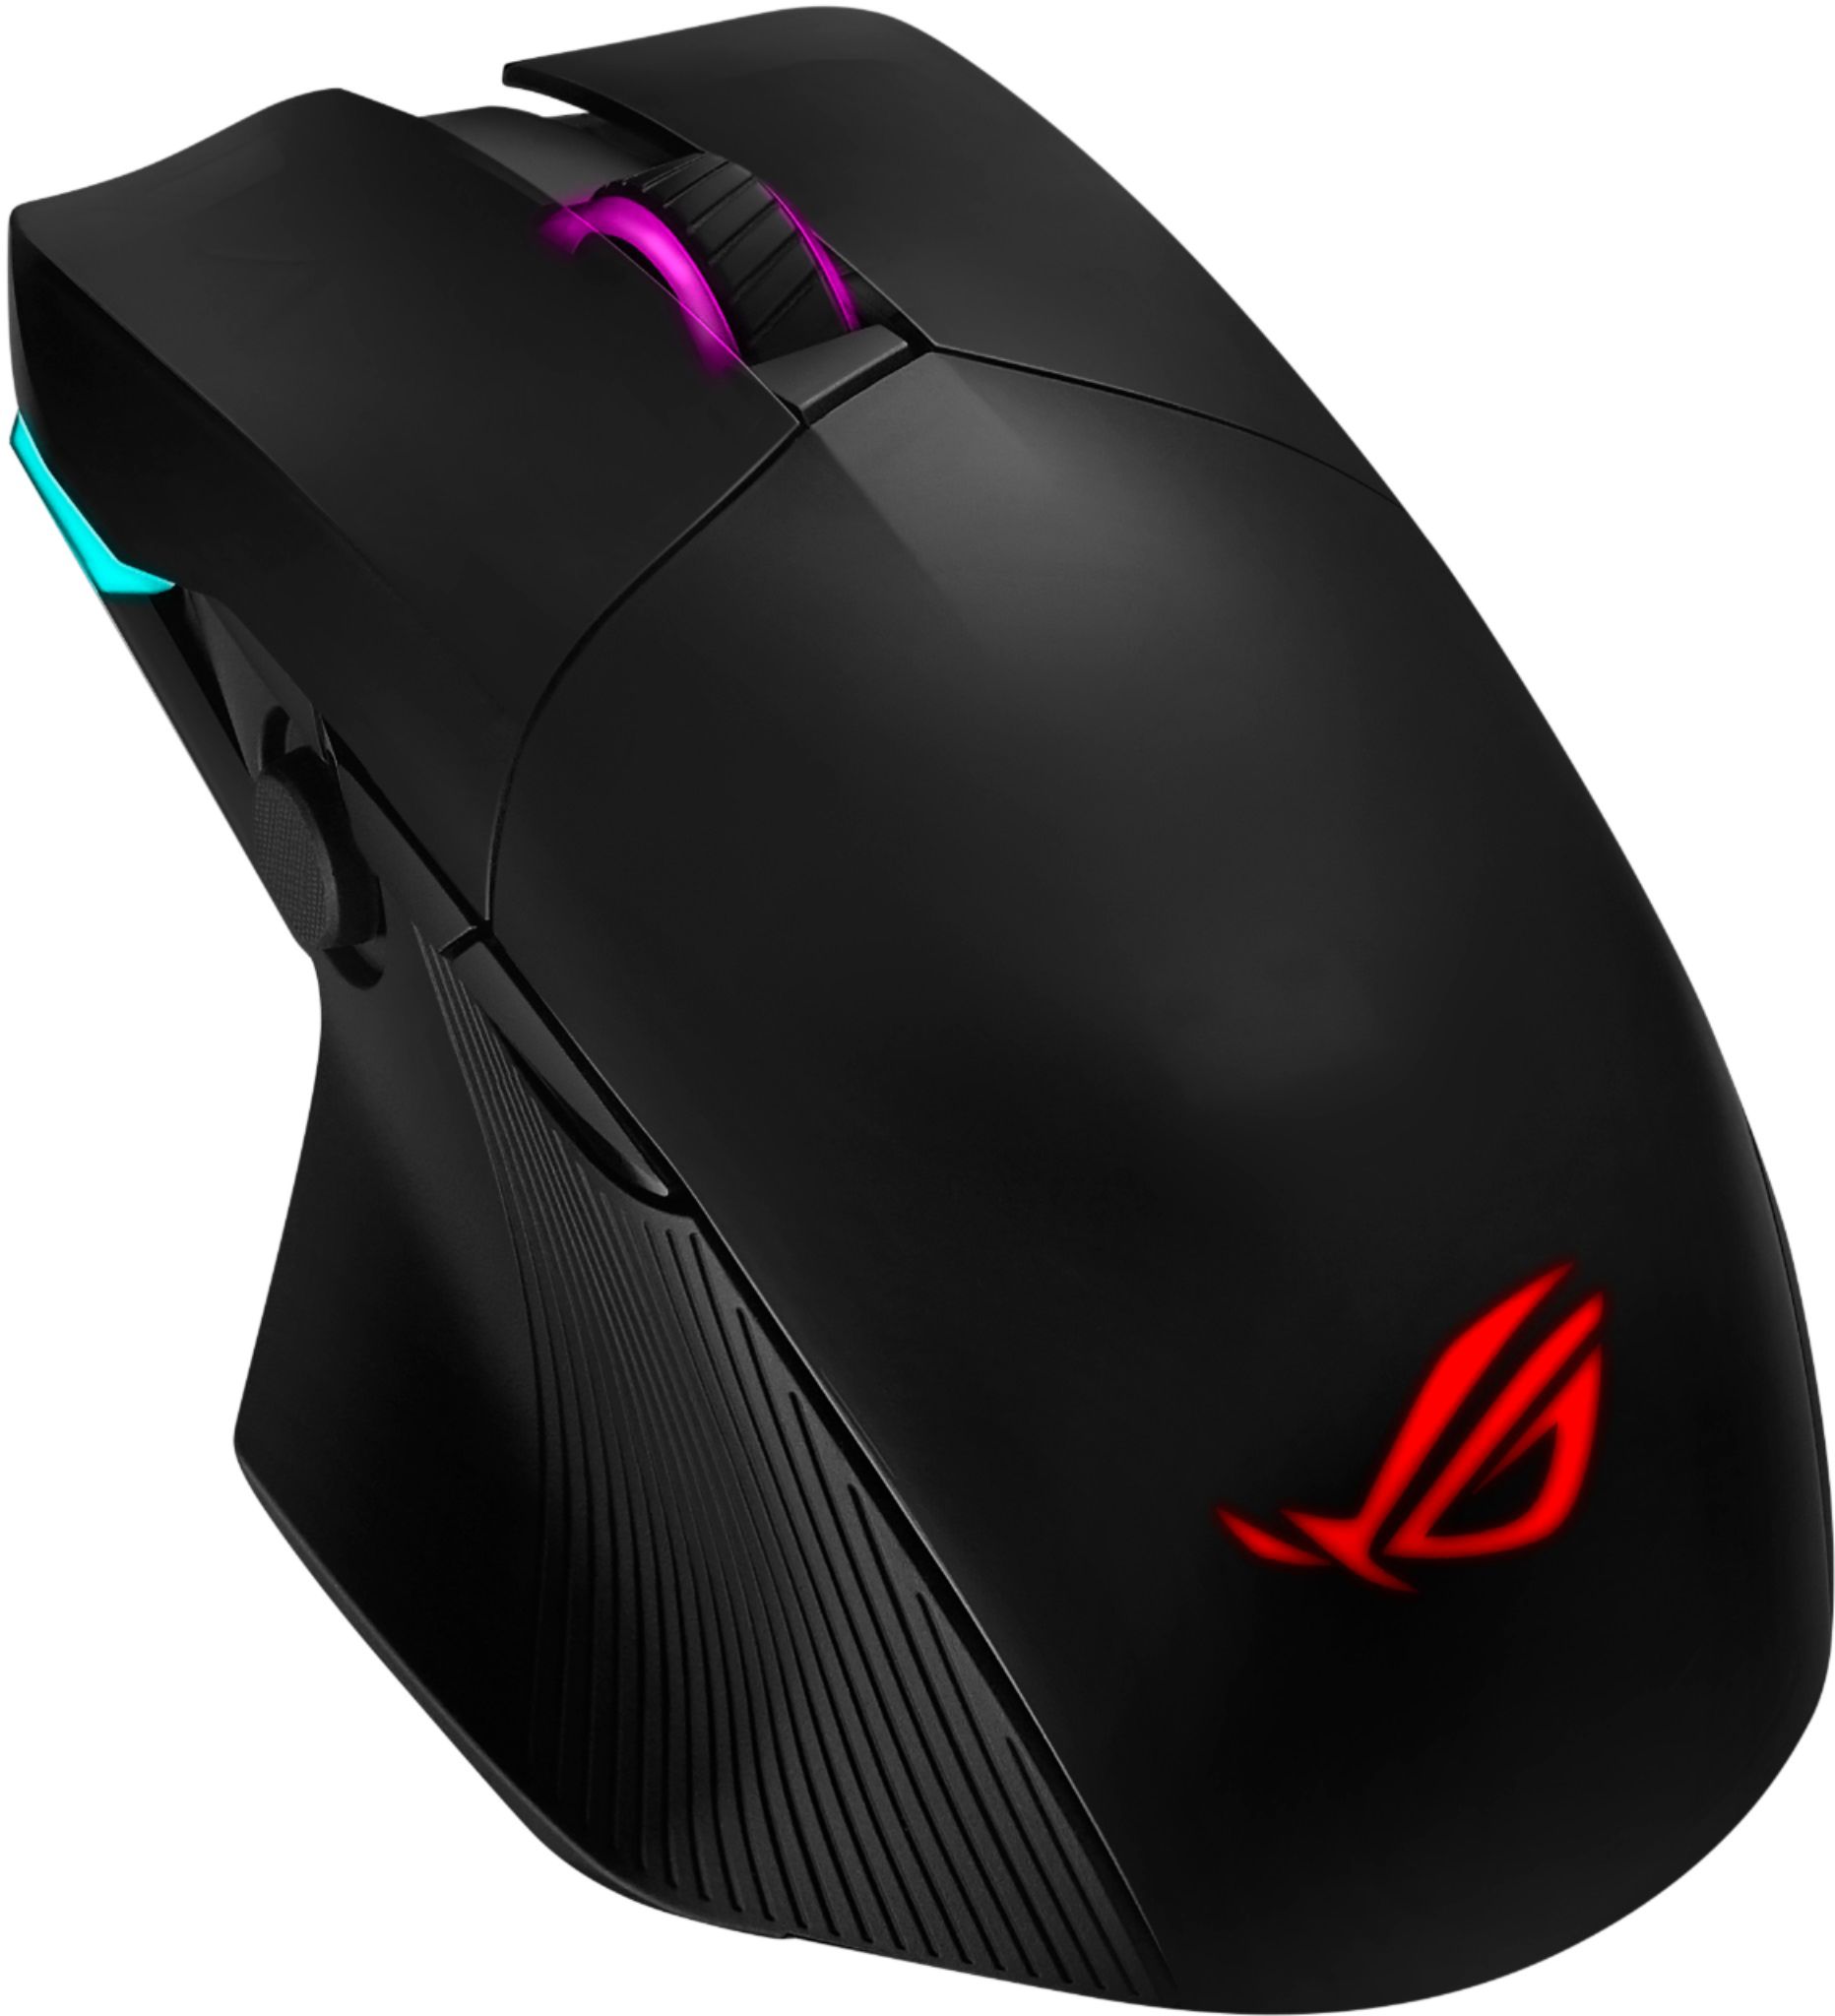 Back View: ASUS - ROG Chakram Bluetooth Optical Gaming Right-Handed Mouse with Aura Sync lighting - Translucent Black